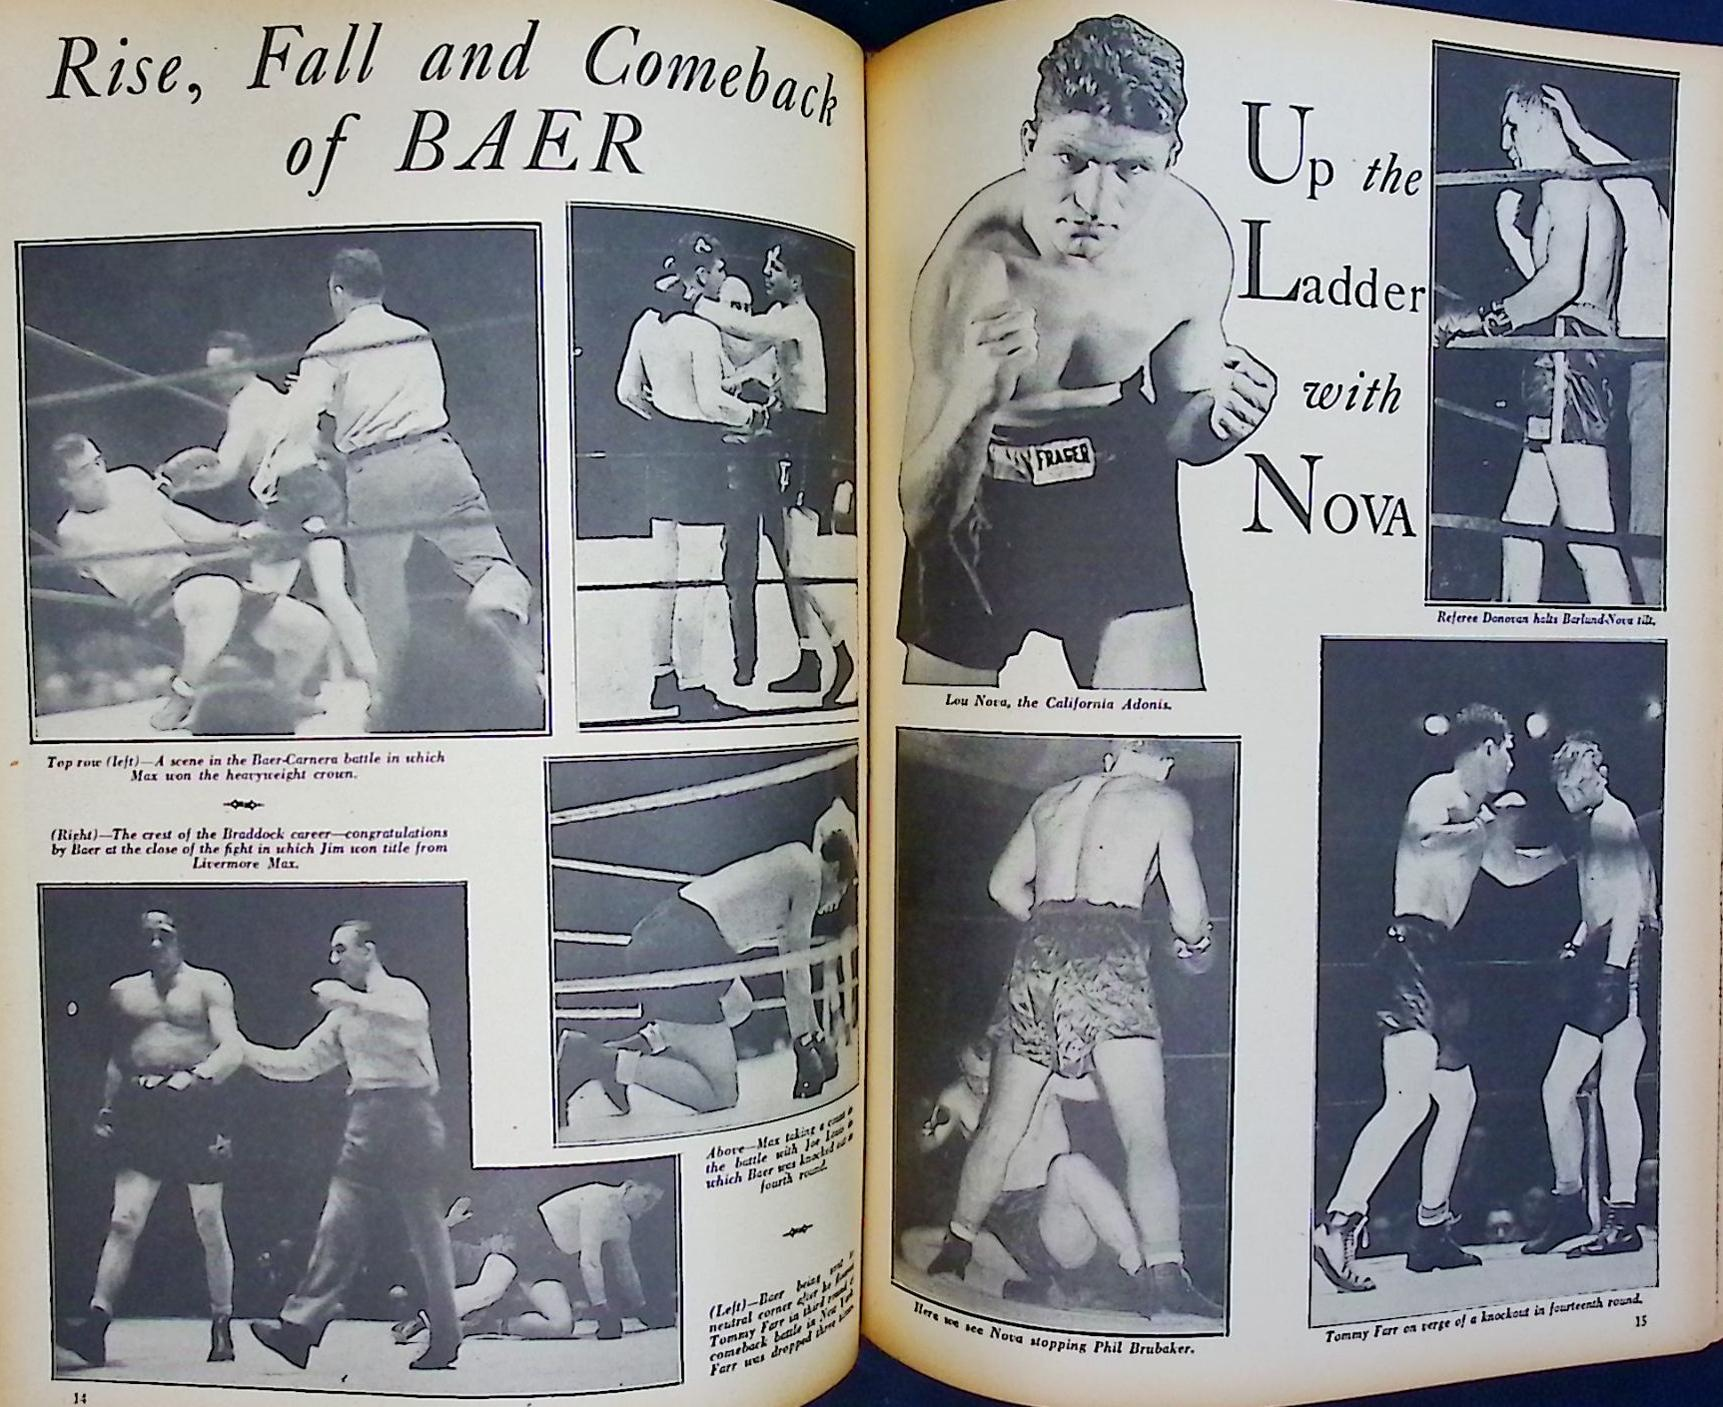 The Ring. World's Foremost Boxing Magazine. Vol XVII February 1938 - Vol XVIII October 1939.